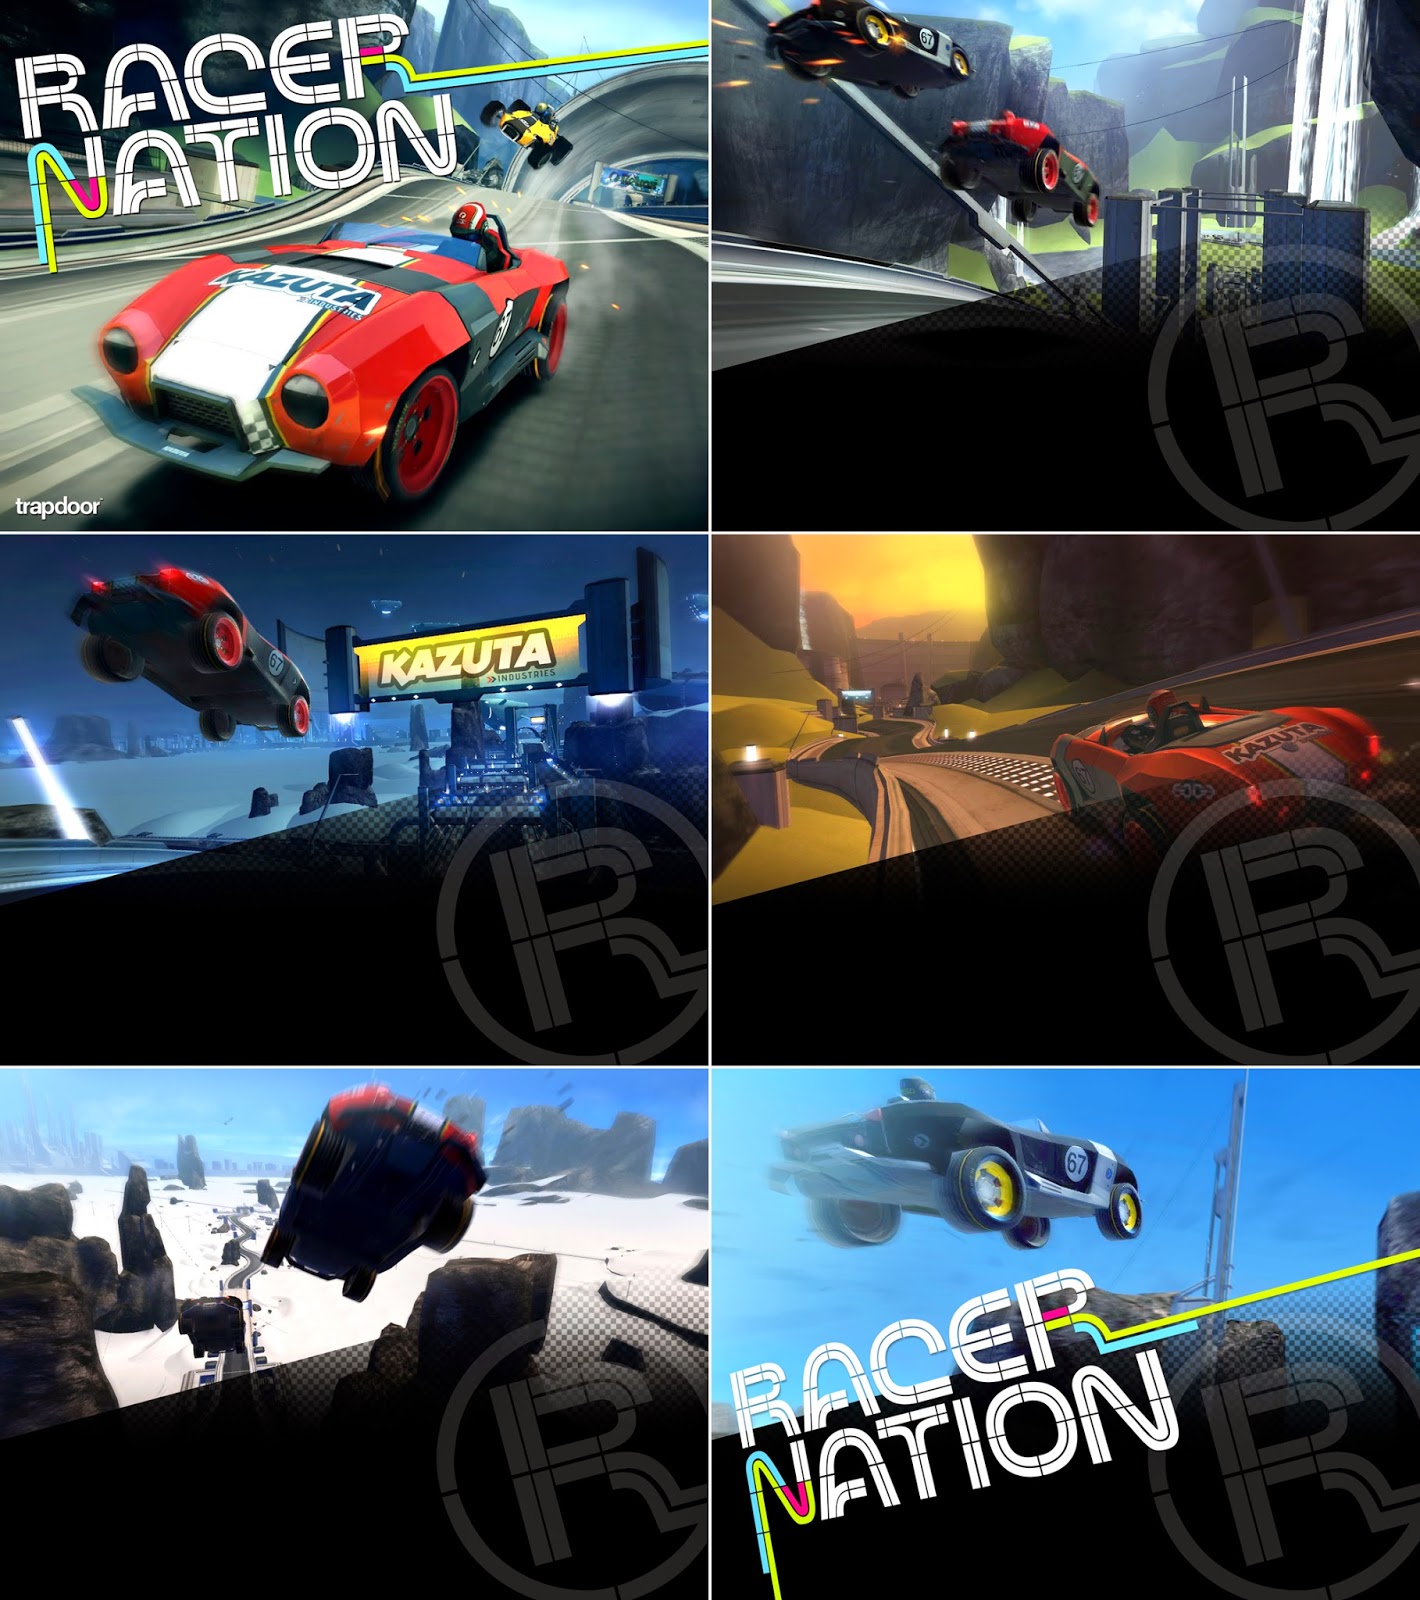 Loading screens teamwork and RSR (early name) promo poster test ...